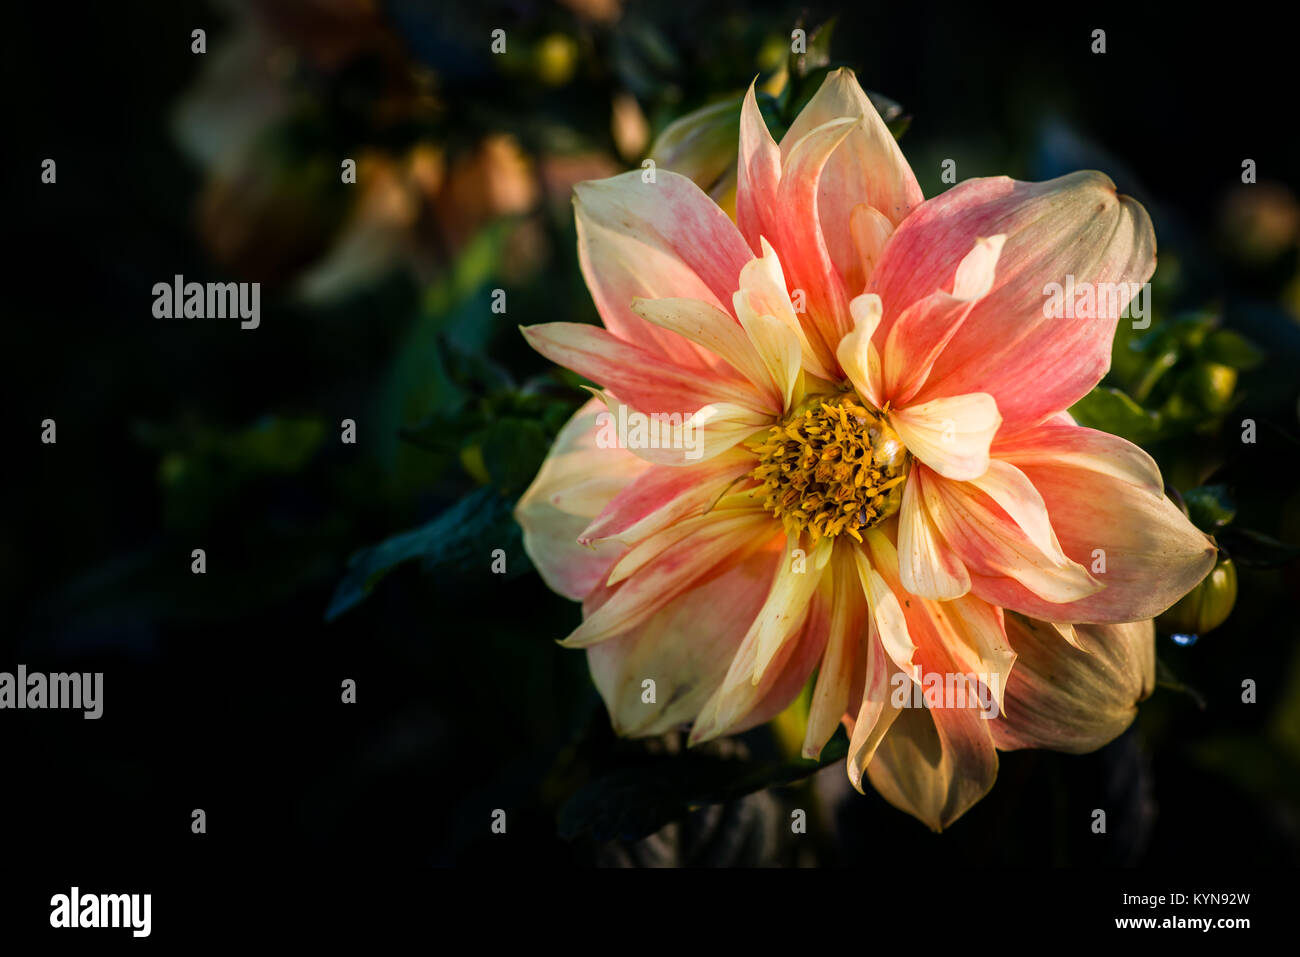 Dahlia named Apple Blossom, a Collerette dahlia (Col) — Large flat florets forming a single outer ring around a central disc and which may overlap a s Stock Photo